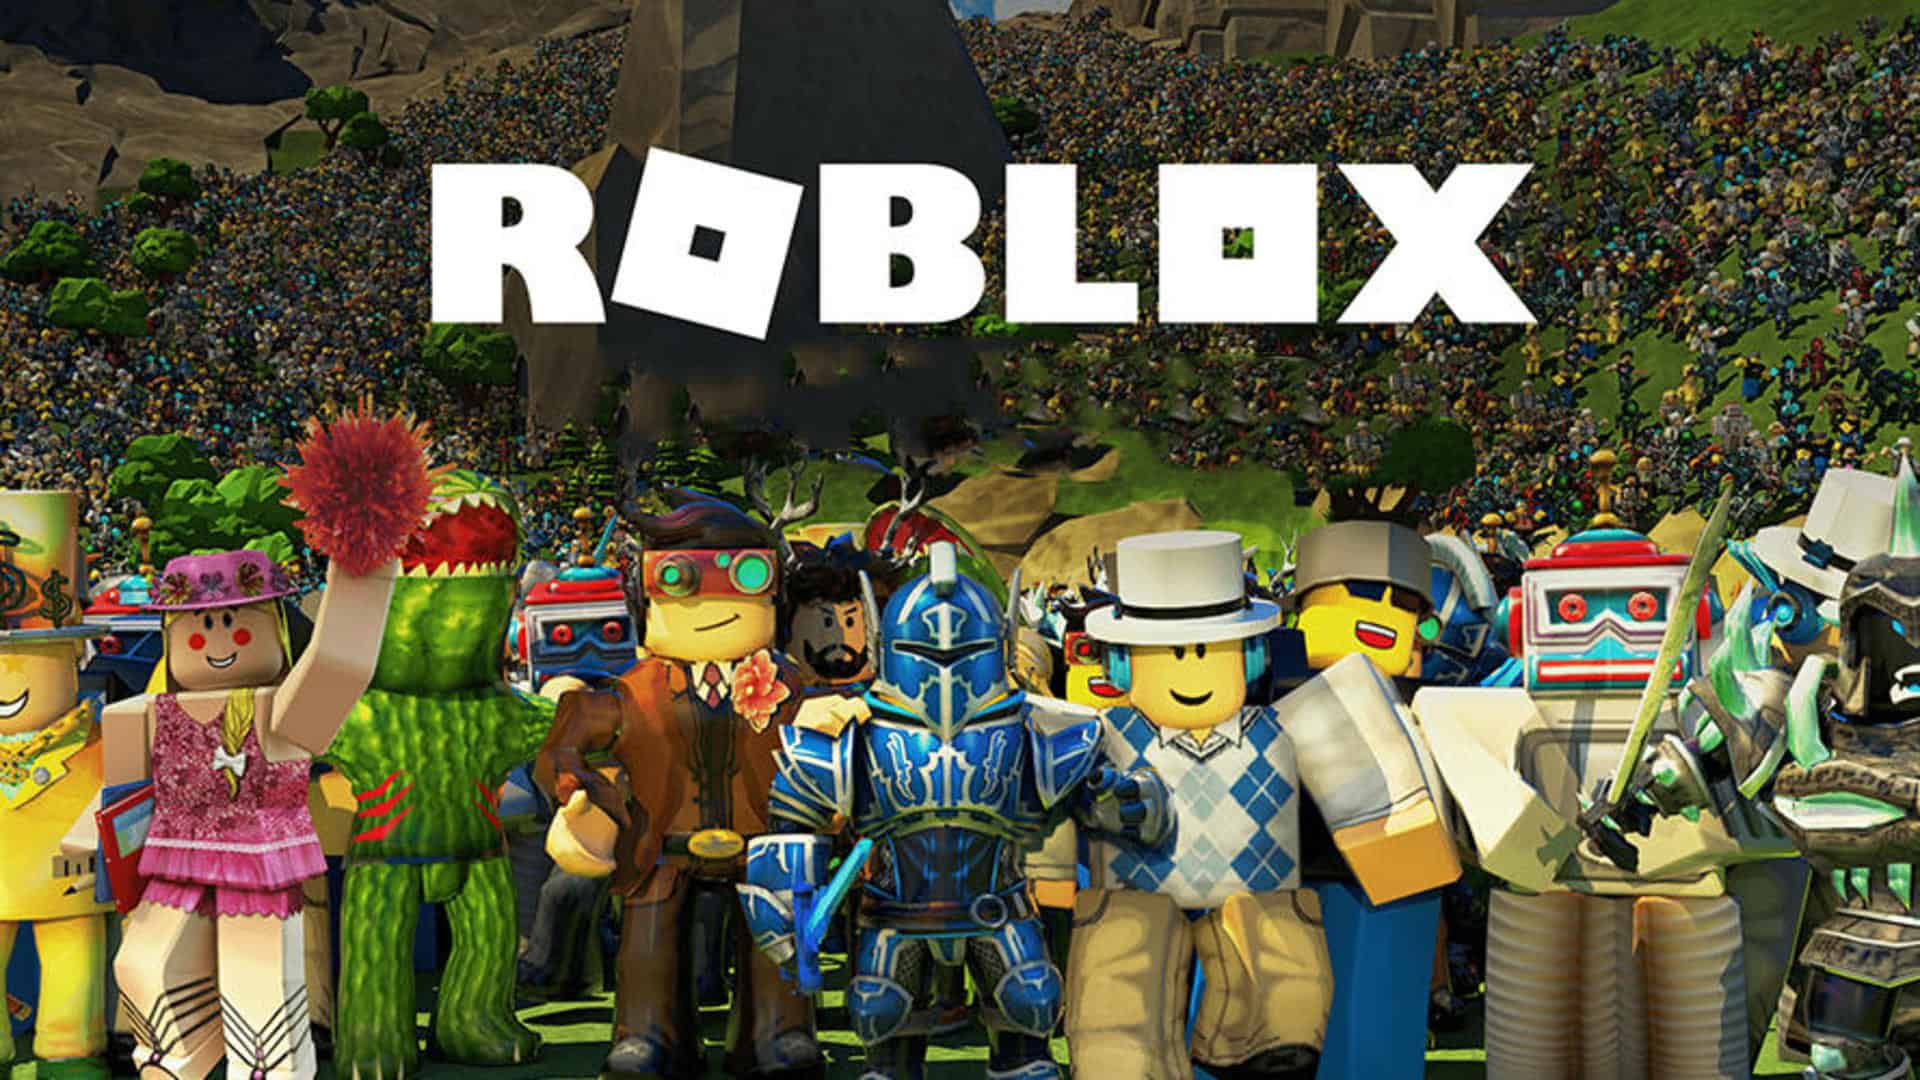 Attention Roblox adventurers! Get in on the action that's